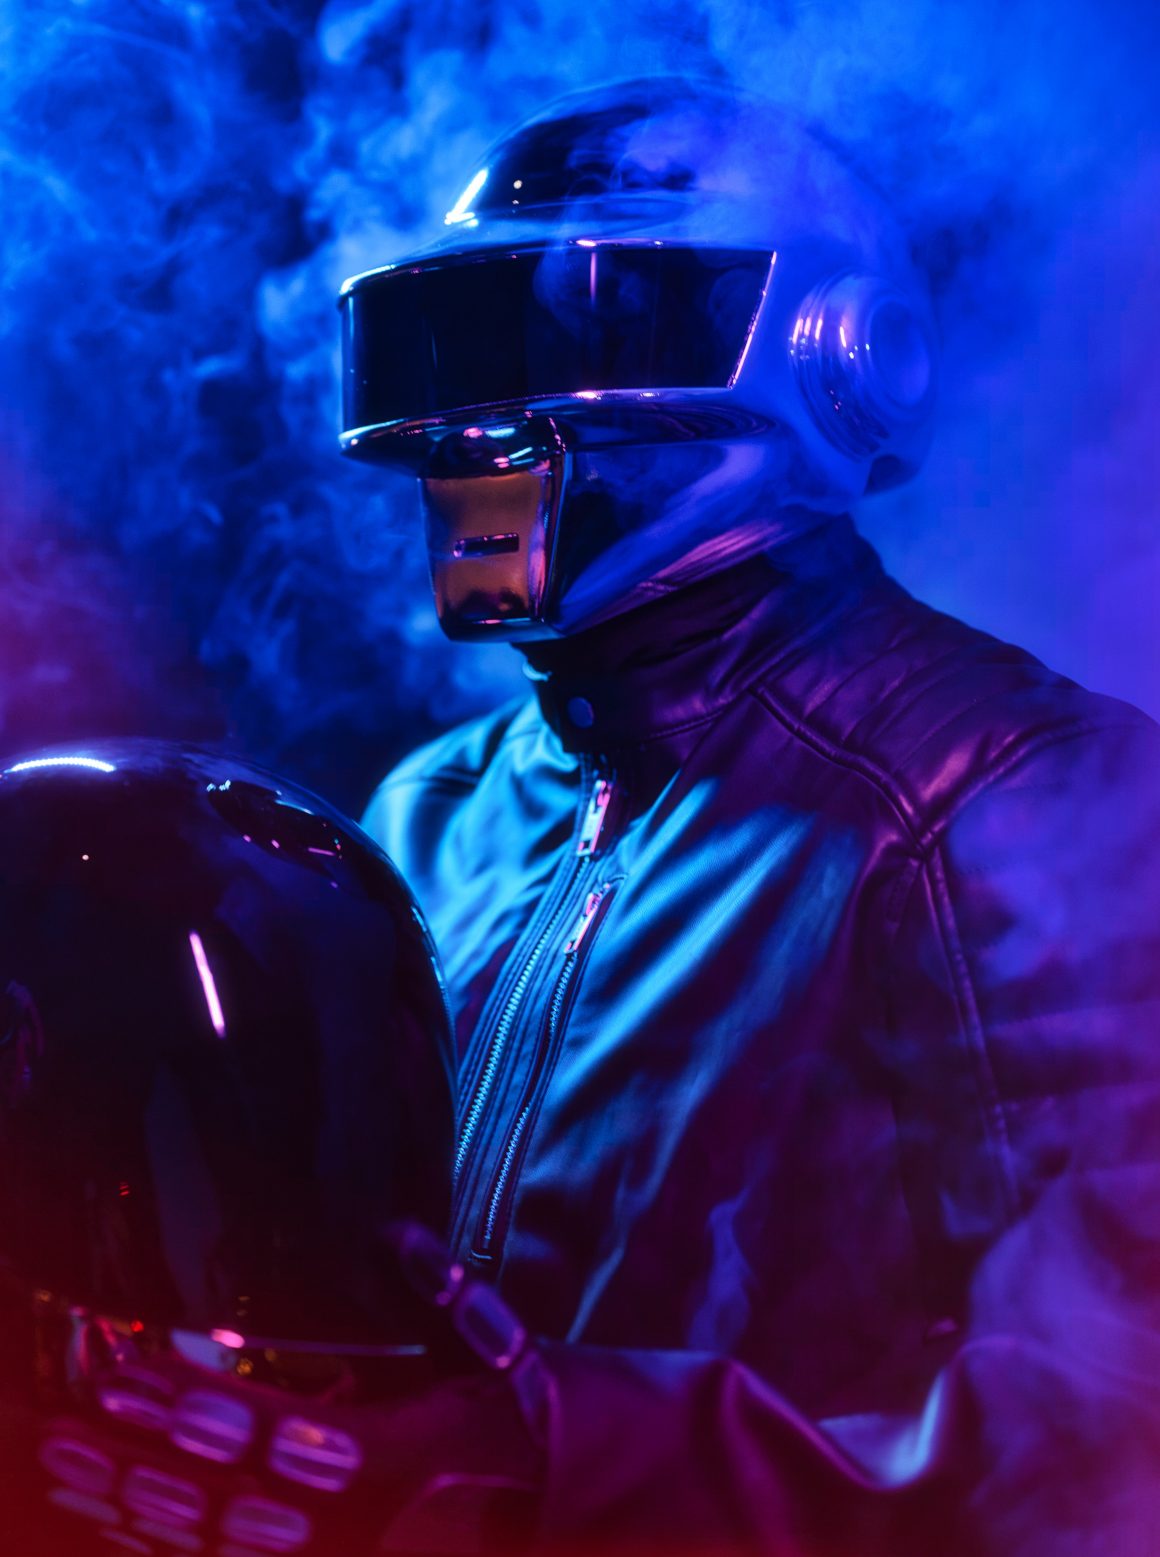 Third member of Daft Punk says he's “Not retiring anytime soon” - The  Gauntlet